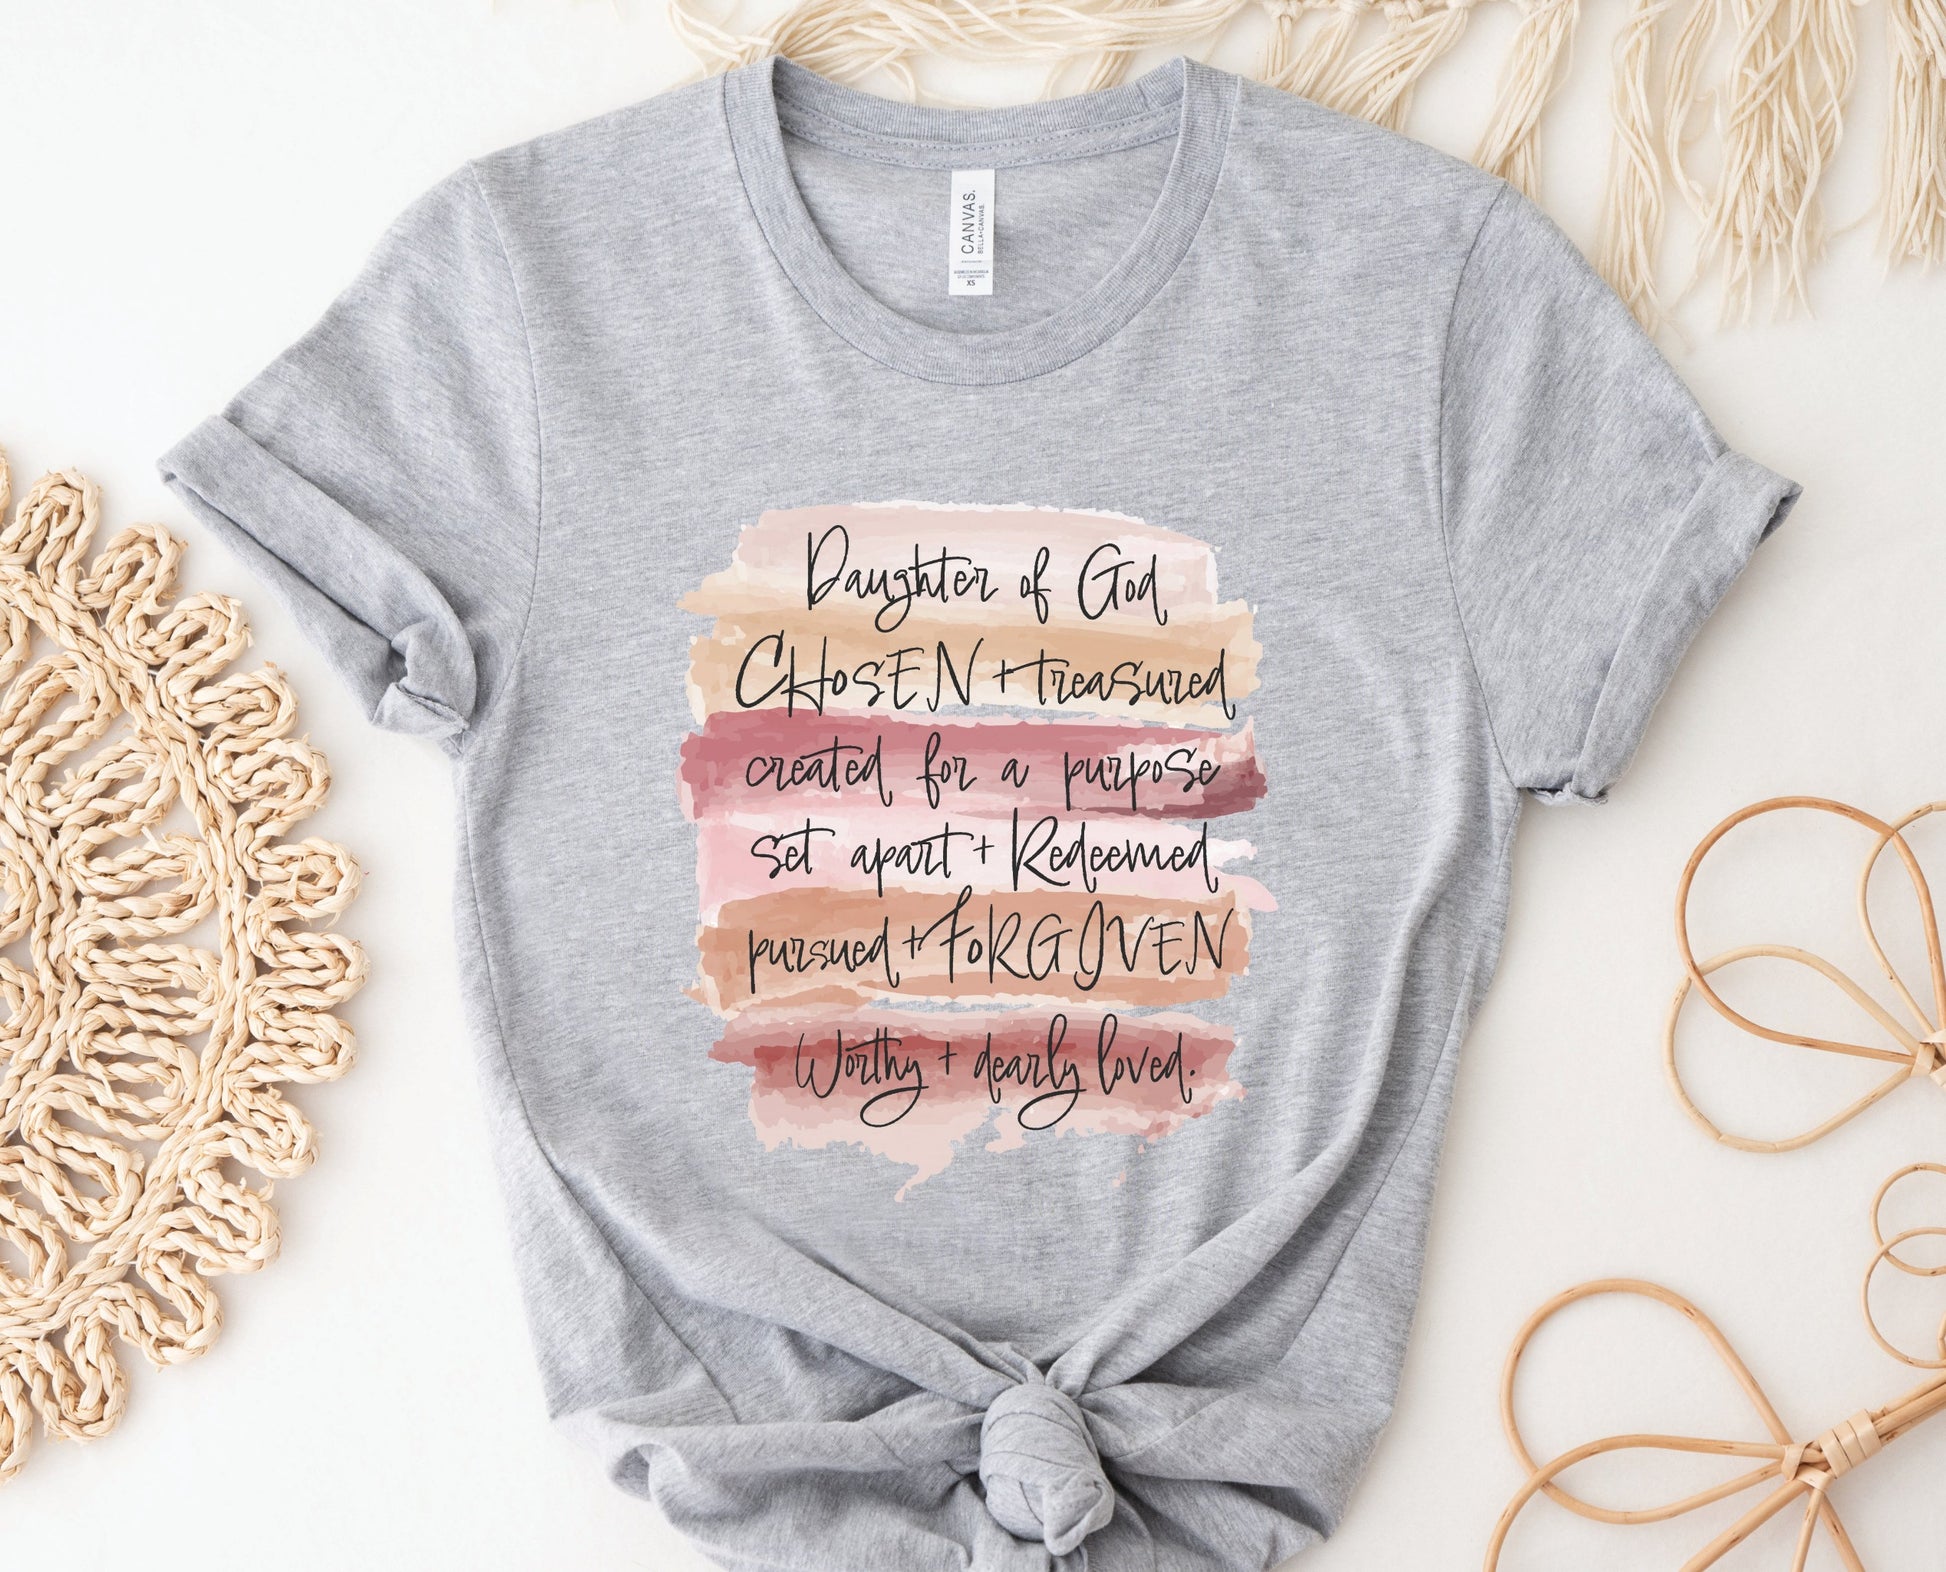 Daughter of God, Chosen, created for a purpose, redeemed, forgiven, worthy, loved, Christian woman aesthetic with neutral colors watercolor splash background printed on soft heather gray unisex t-shirt for women